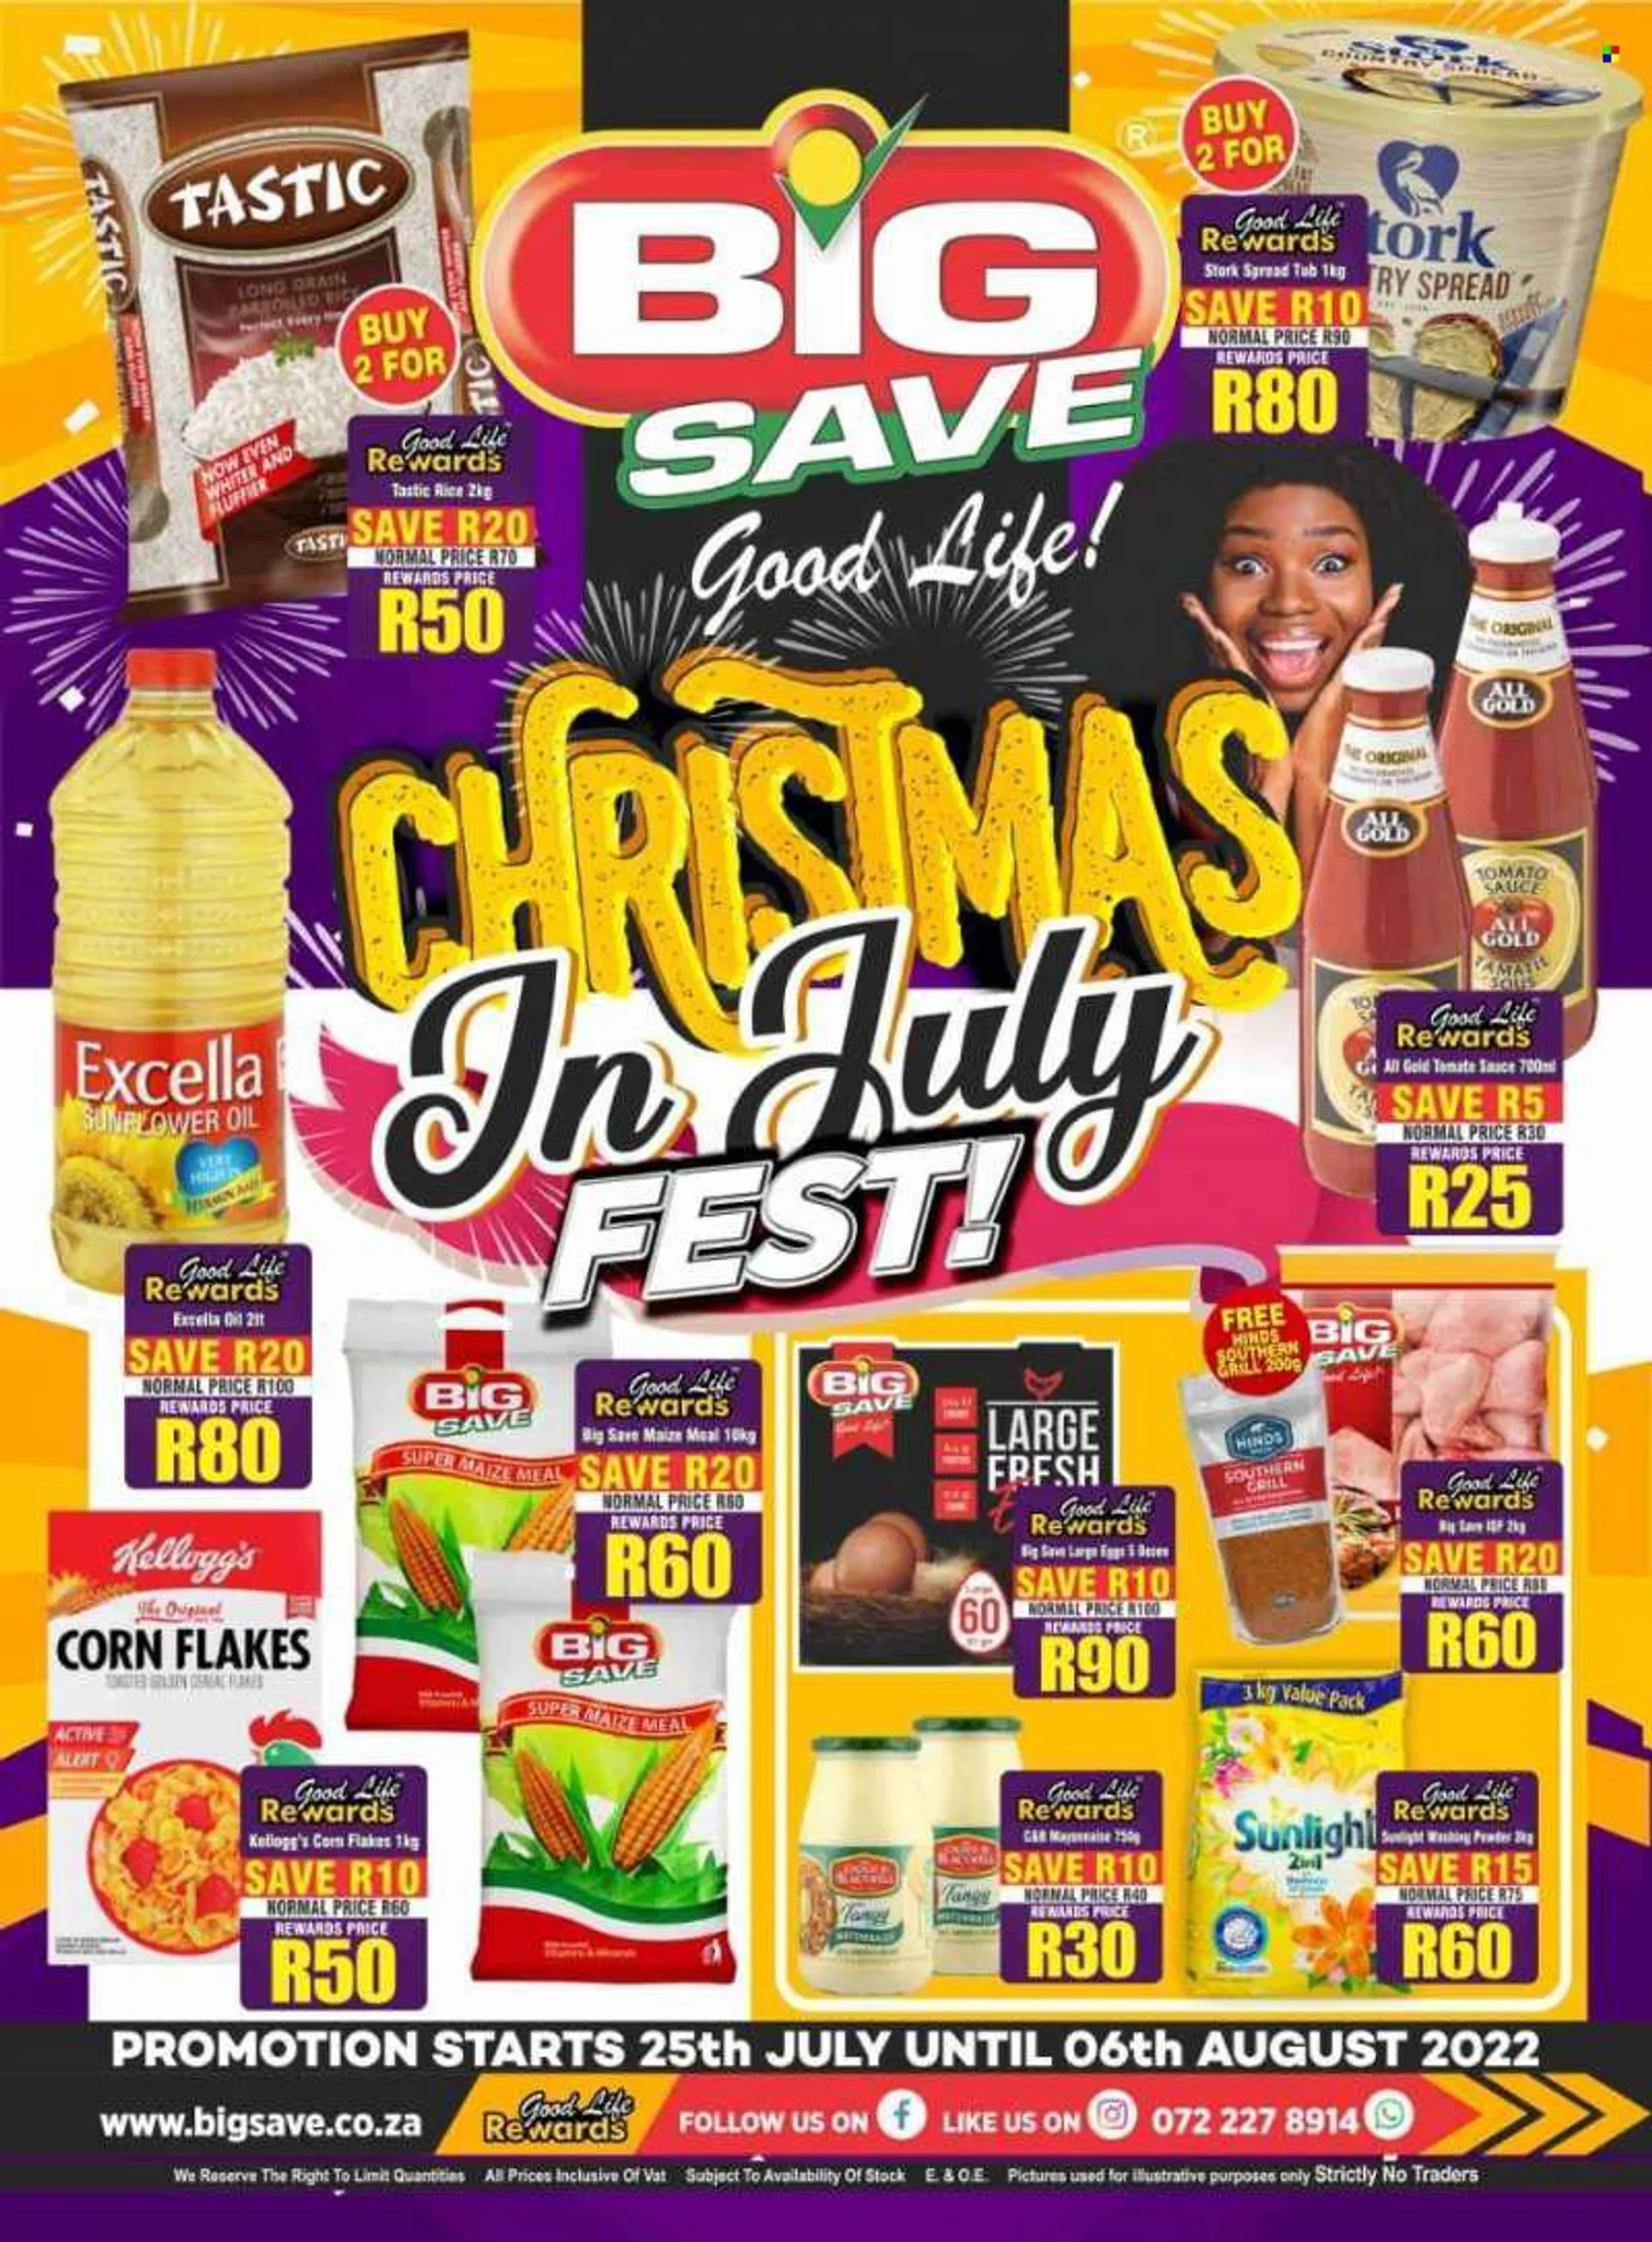 Big Save catalogue  - 25/07/2022 - 06/08/2022 - Sales products - sauce, large eggs, mayonnaise, Kelloggs, maize meal, tomato sauce, cereals, corn flakes, rice, Tastic, Good Life, Hinds, sunflower oil, oil, laundry powder, Sunlight, grill. Page 1.